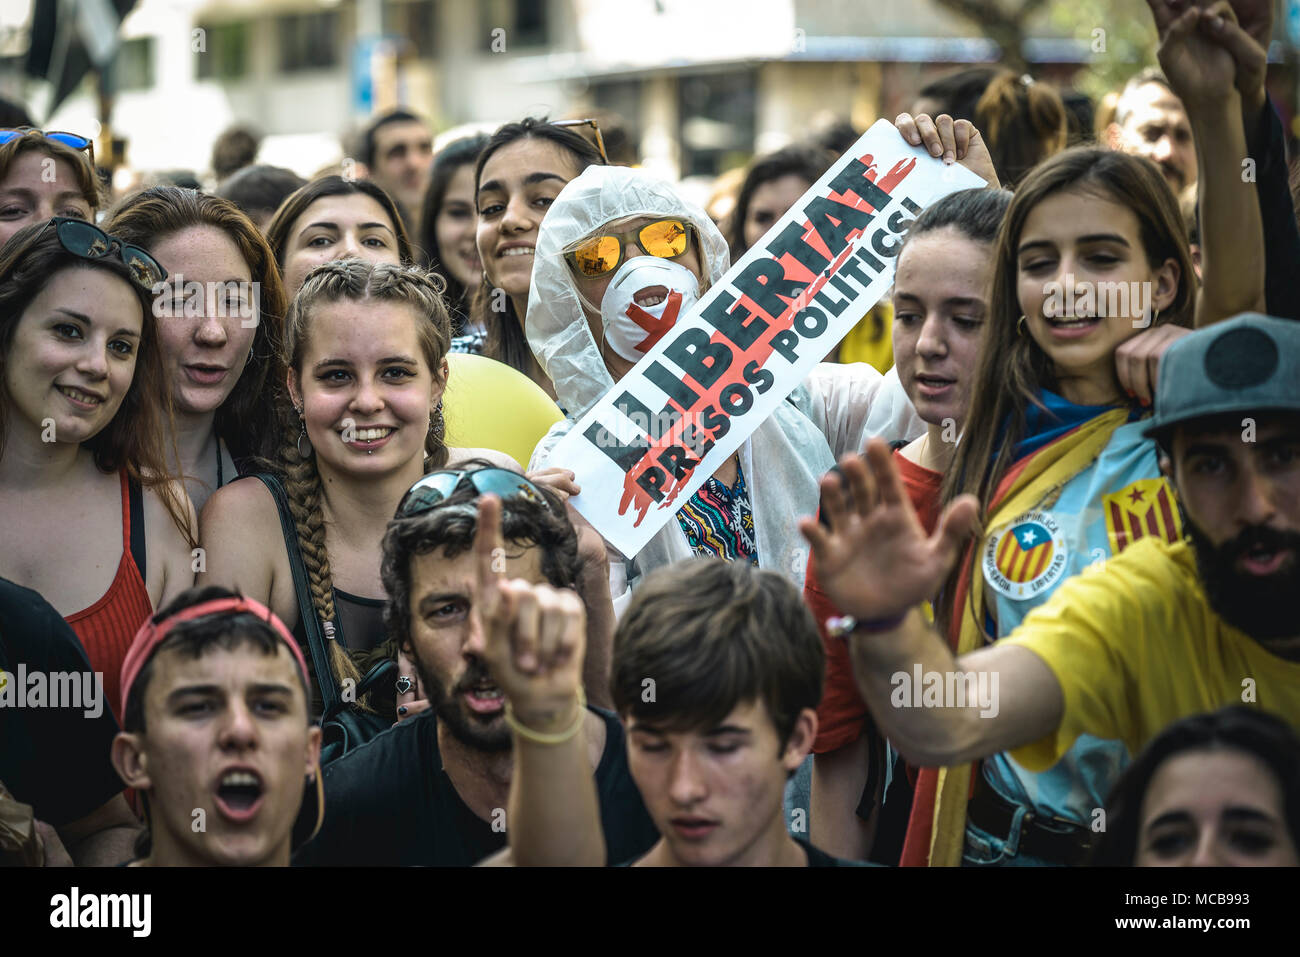 Barcelona, Spain. 15 April, 2018: Pro-independence Catalans fill Barcelona's Avenida del Prallel waving flags and shouting slogans during a demonstration for the release of jailed pro-independence politicians Credit: Matthias Oesterle/Alamy Live News Stock Photo